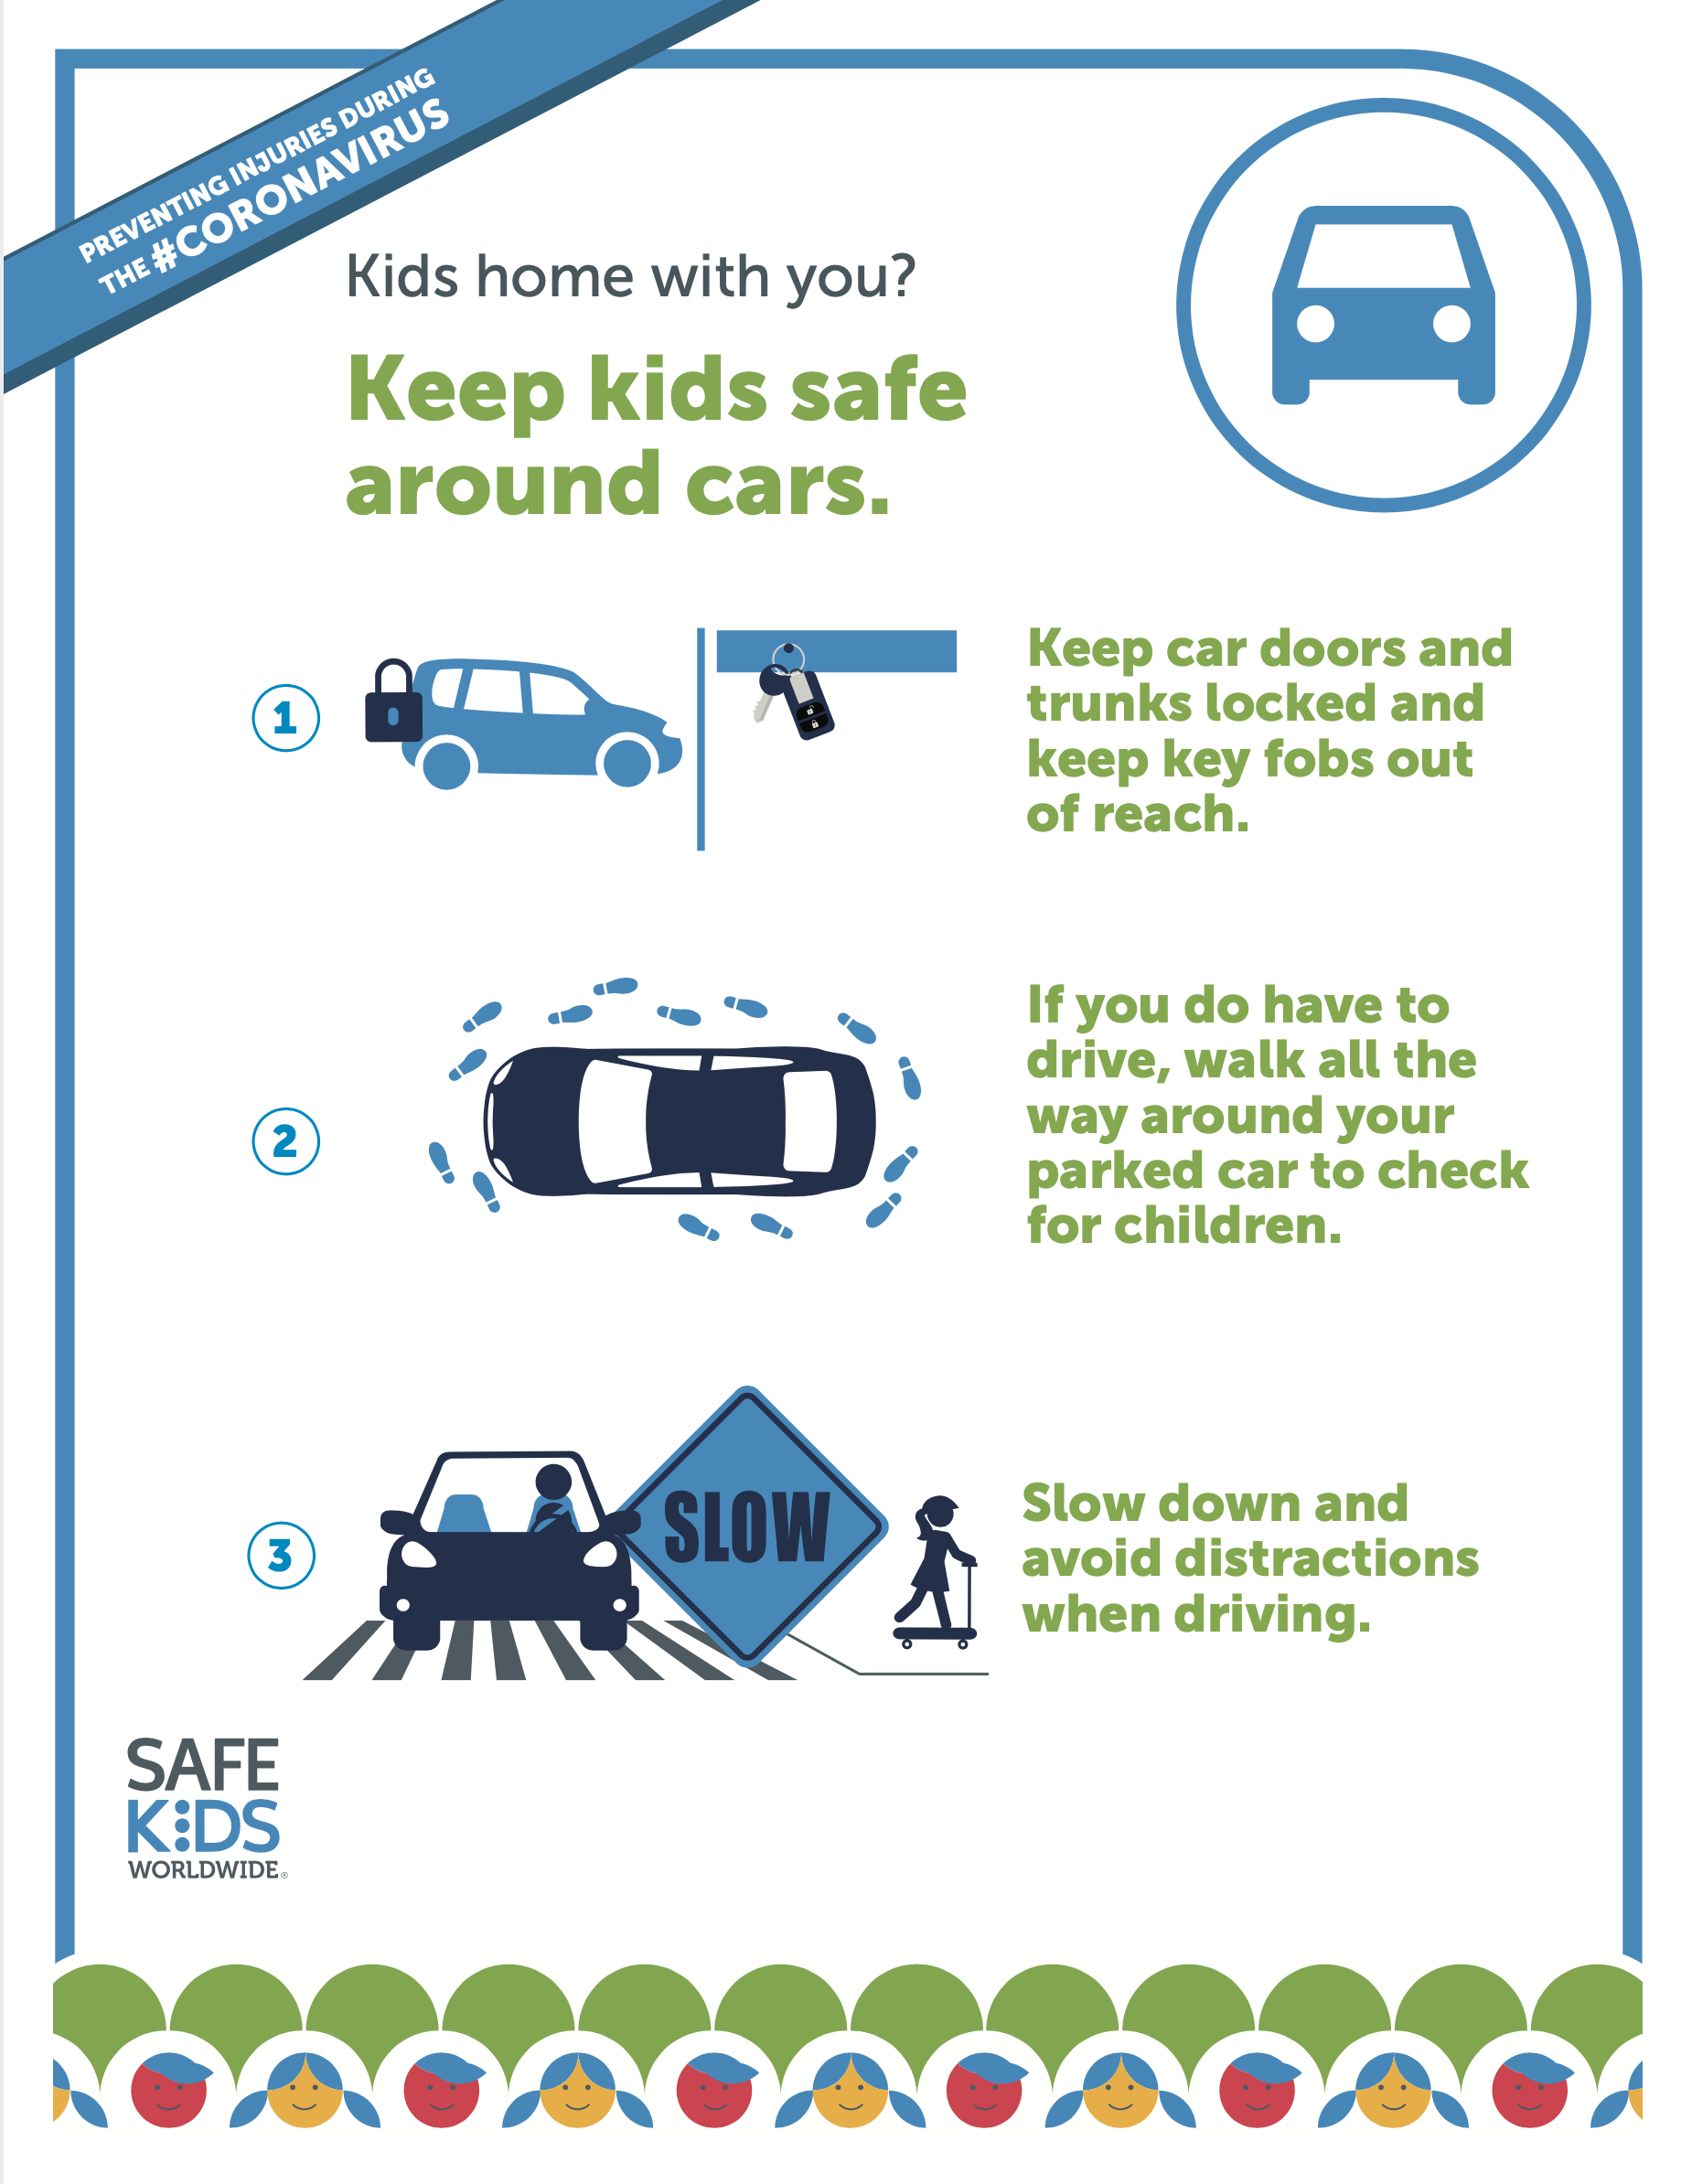  three tips to keep in mind to keep kids safe in and around cars during the coronavirus pandemic.